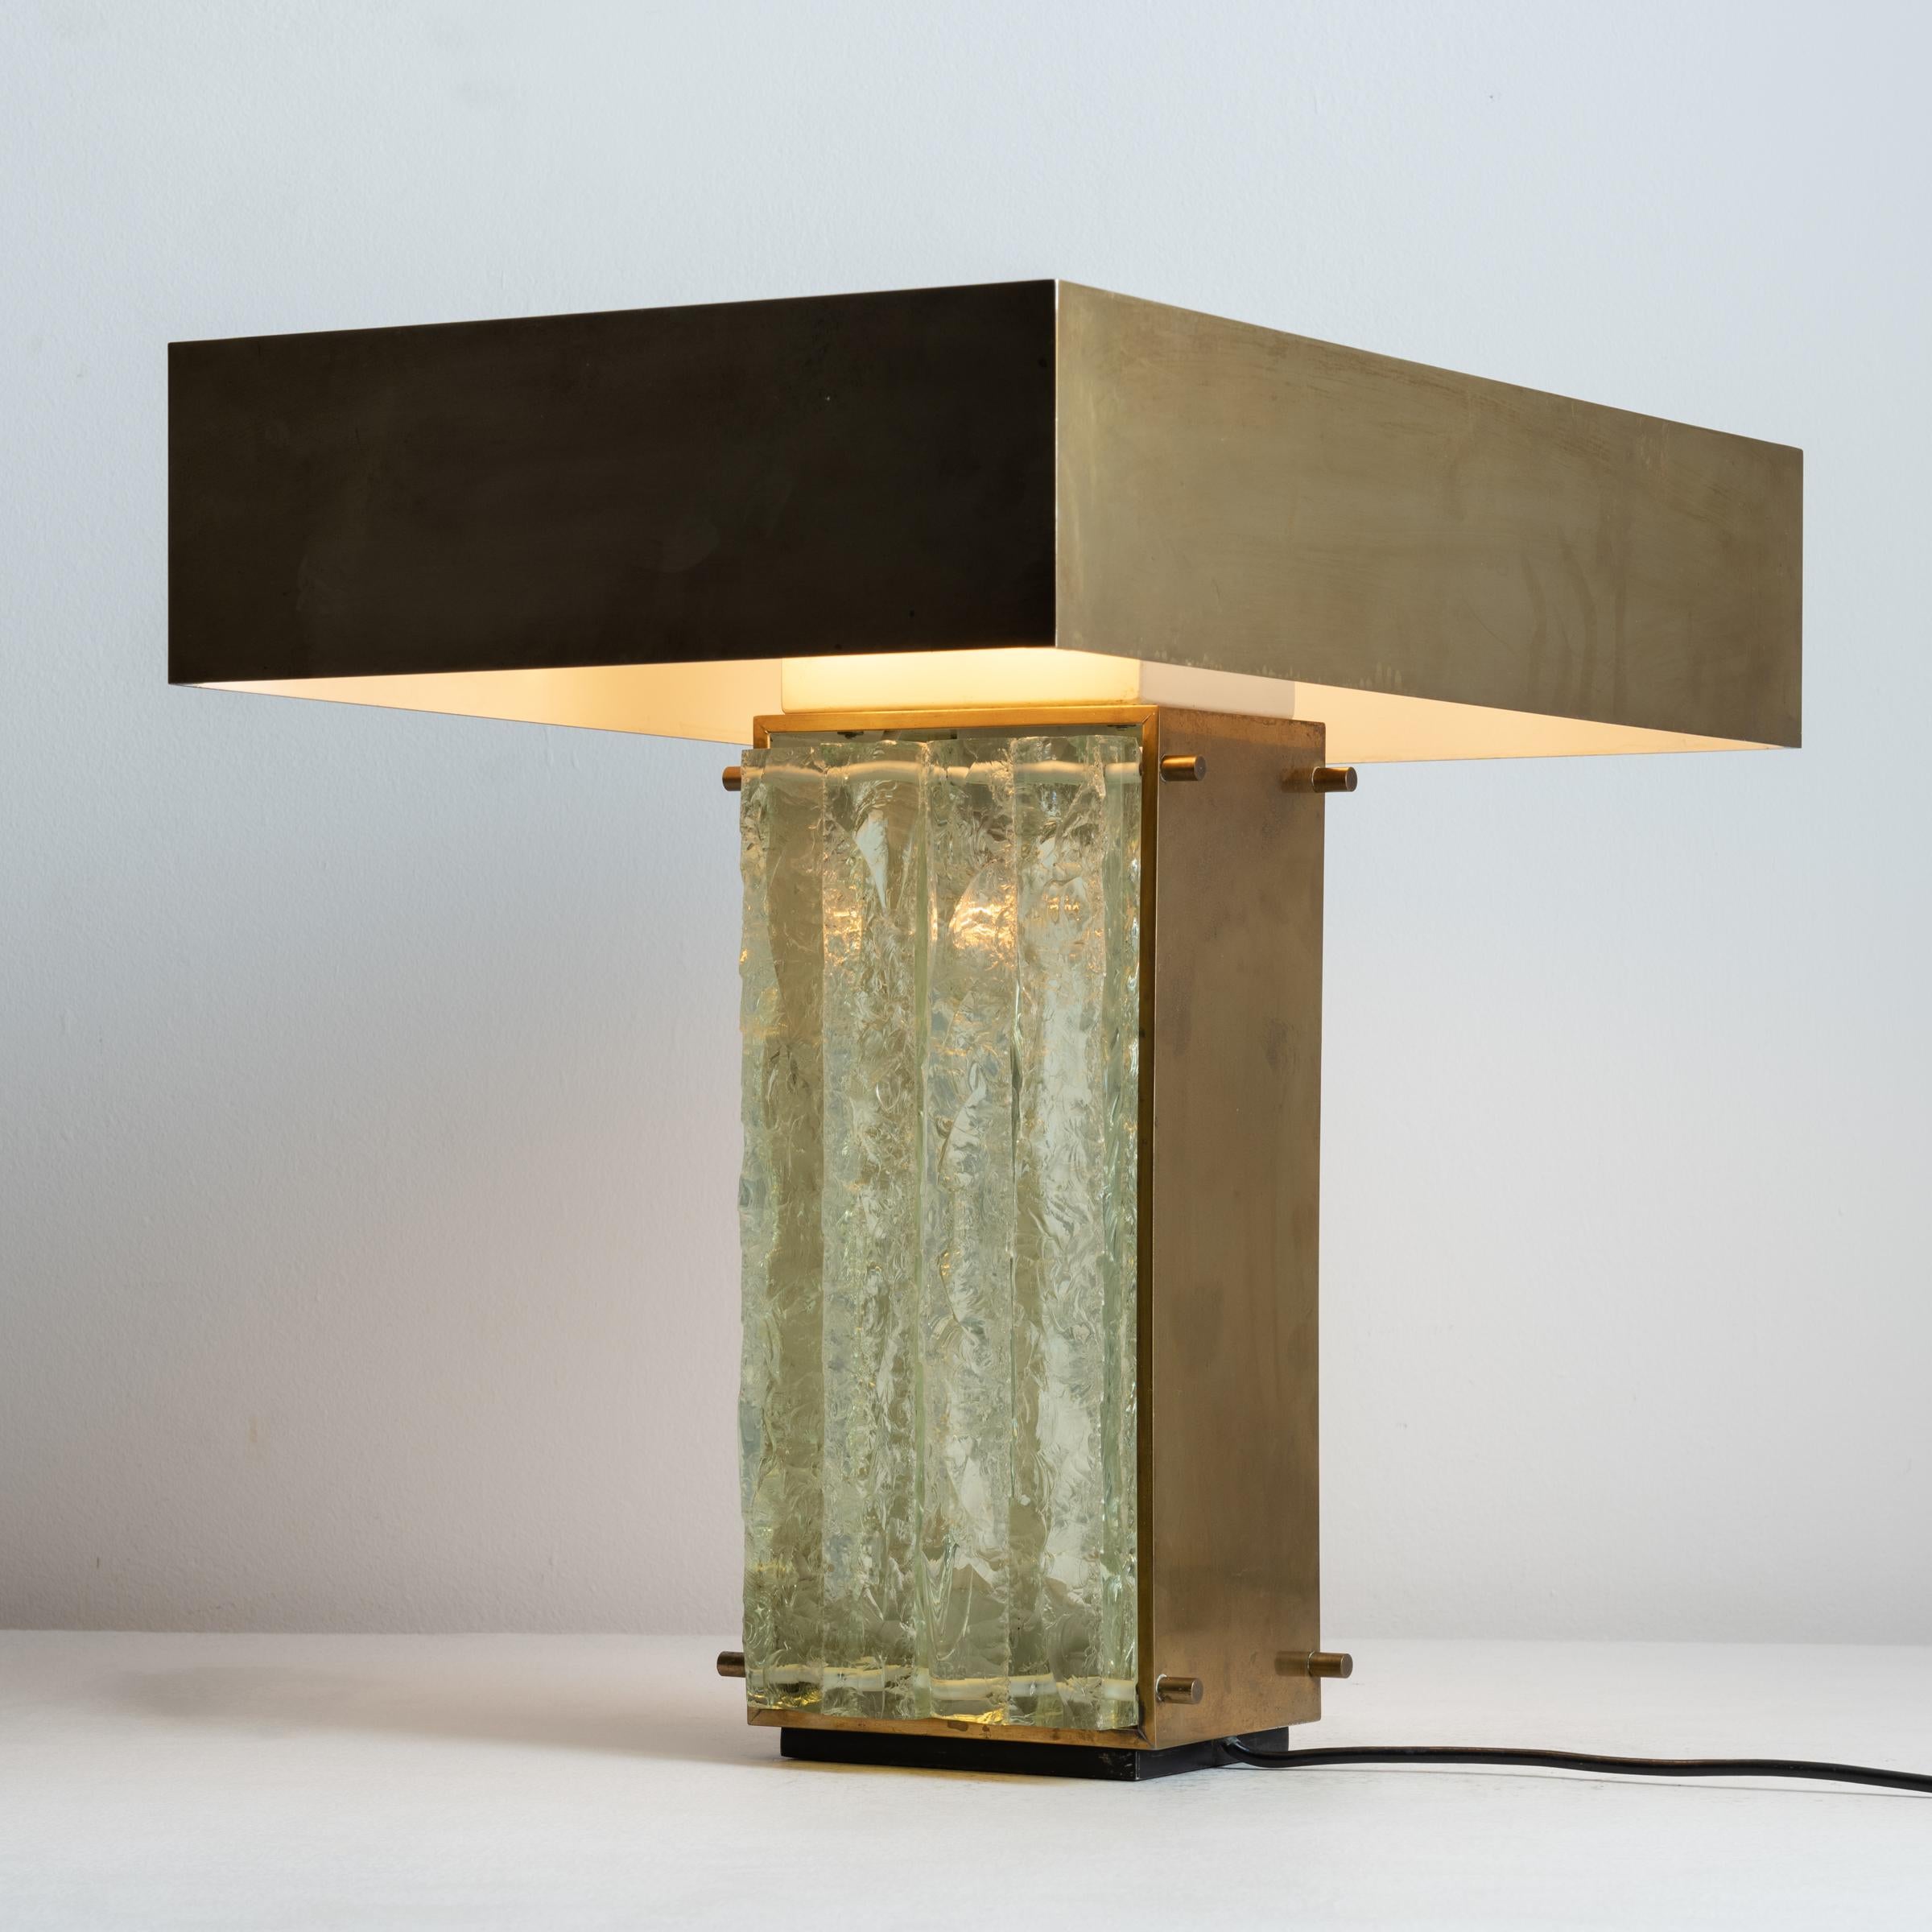 Rare table lamp by Max Ingrand for Fontana Arte. Designed and manufactured in Italy, circa 1960's. Brass, glass. We recommend two E14 60w maximum bulbs. Bulb not included. Original EU cord.
Measurement indicated based on OAH.
Shade Height: 3.16